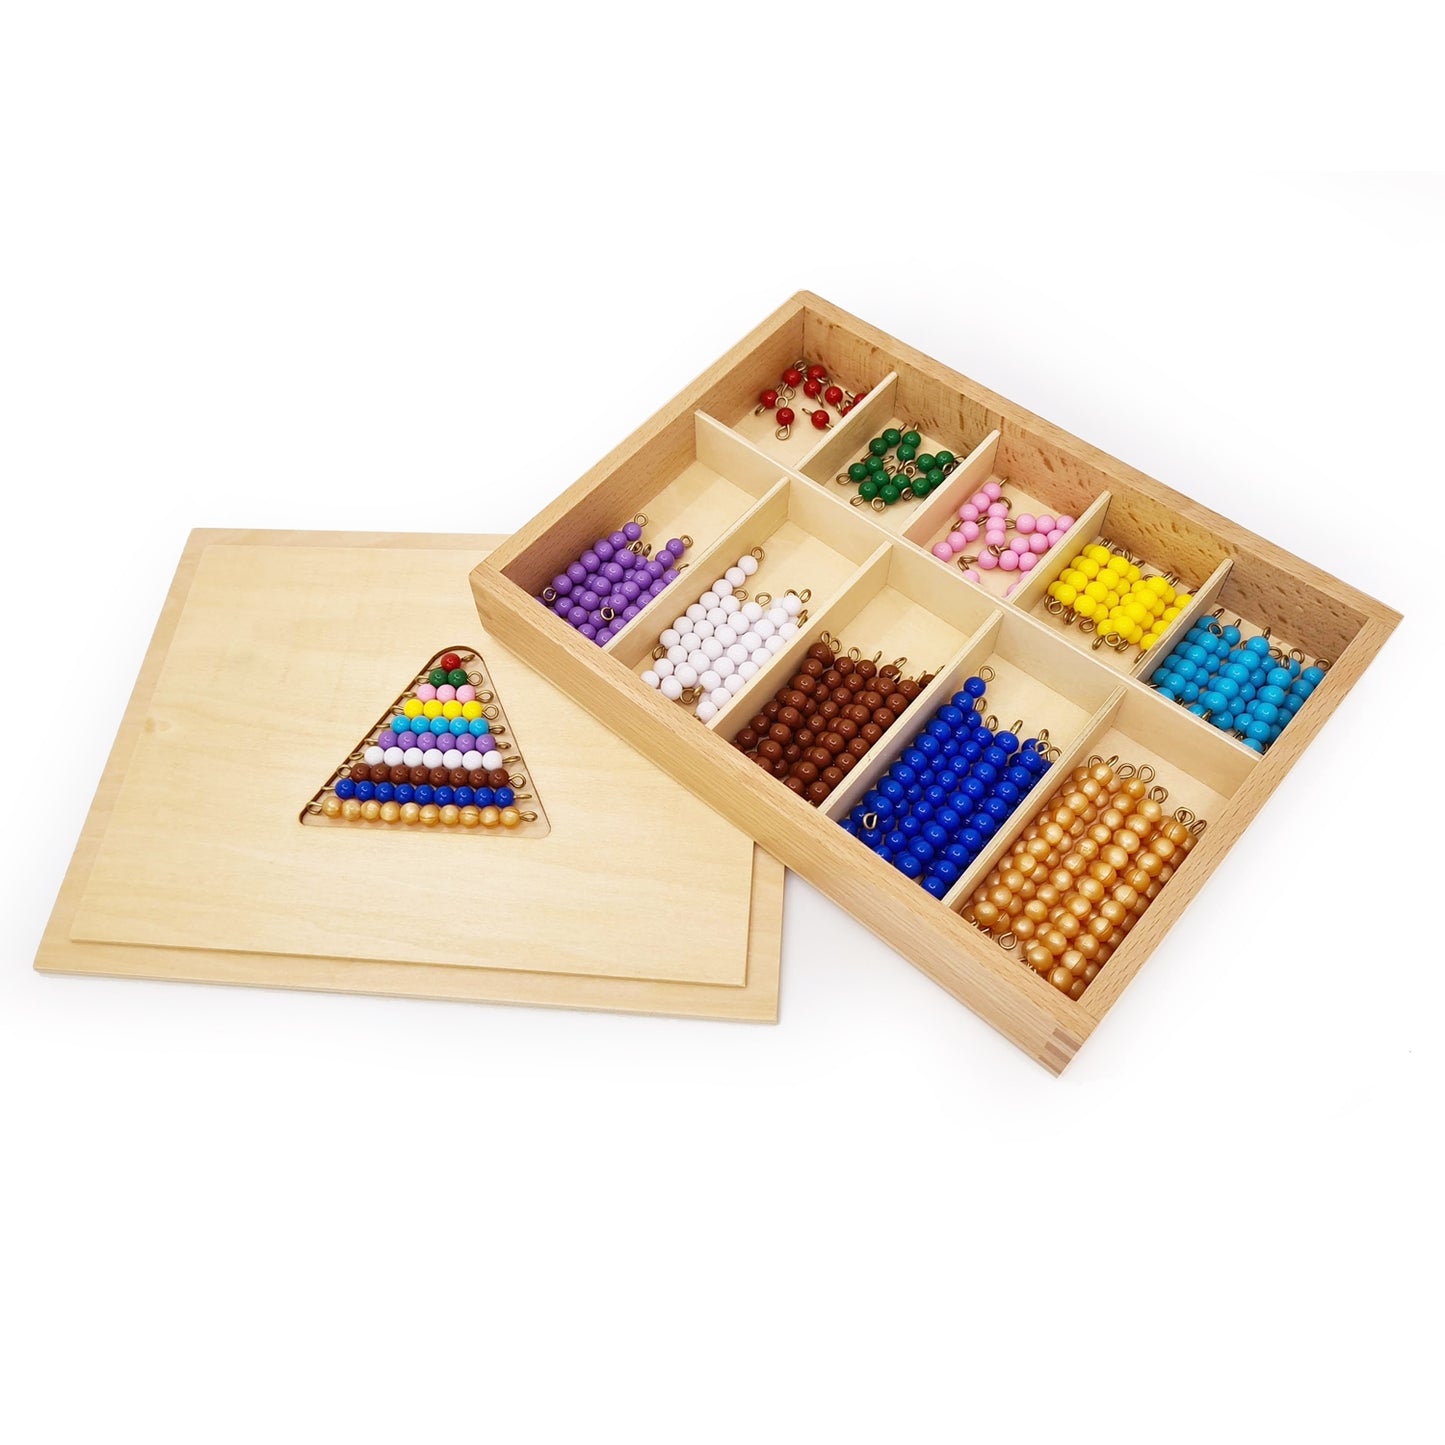 10 Short Bead Stairs in wooden box